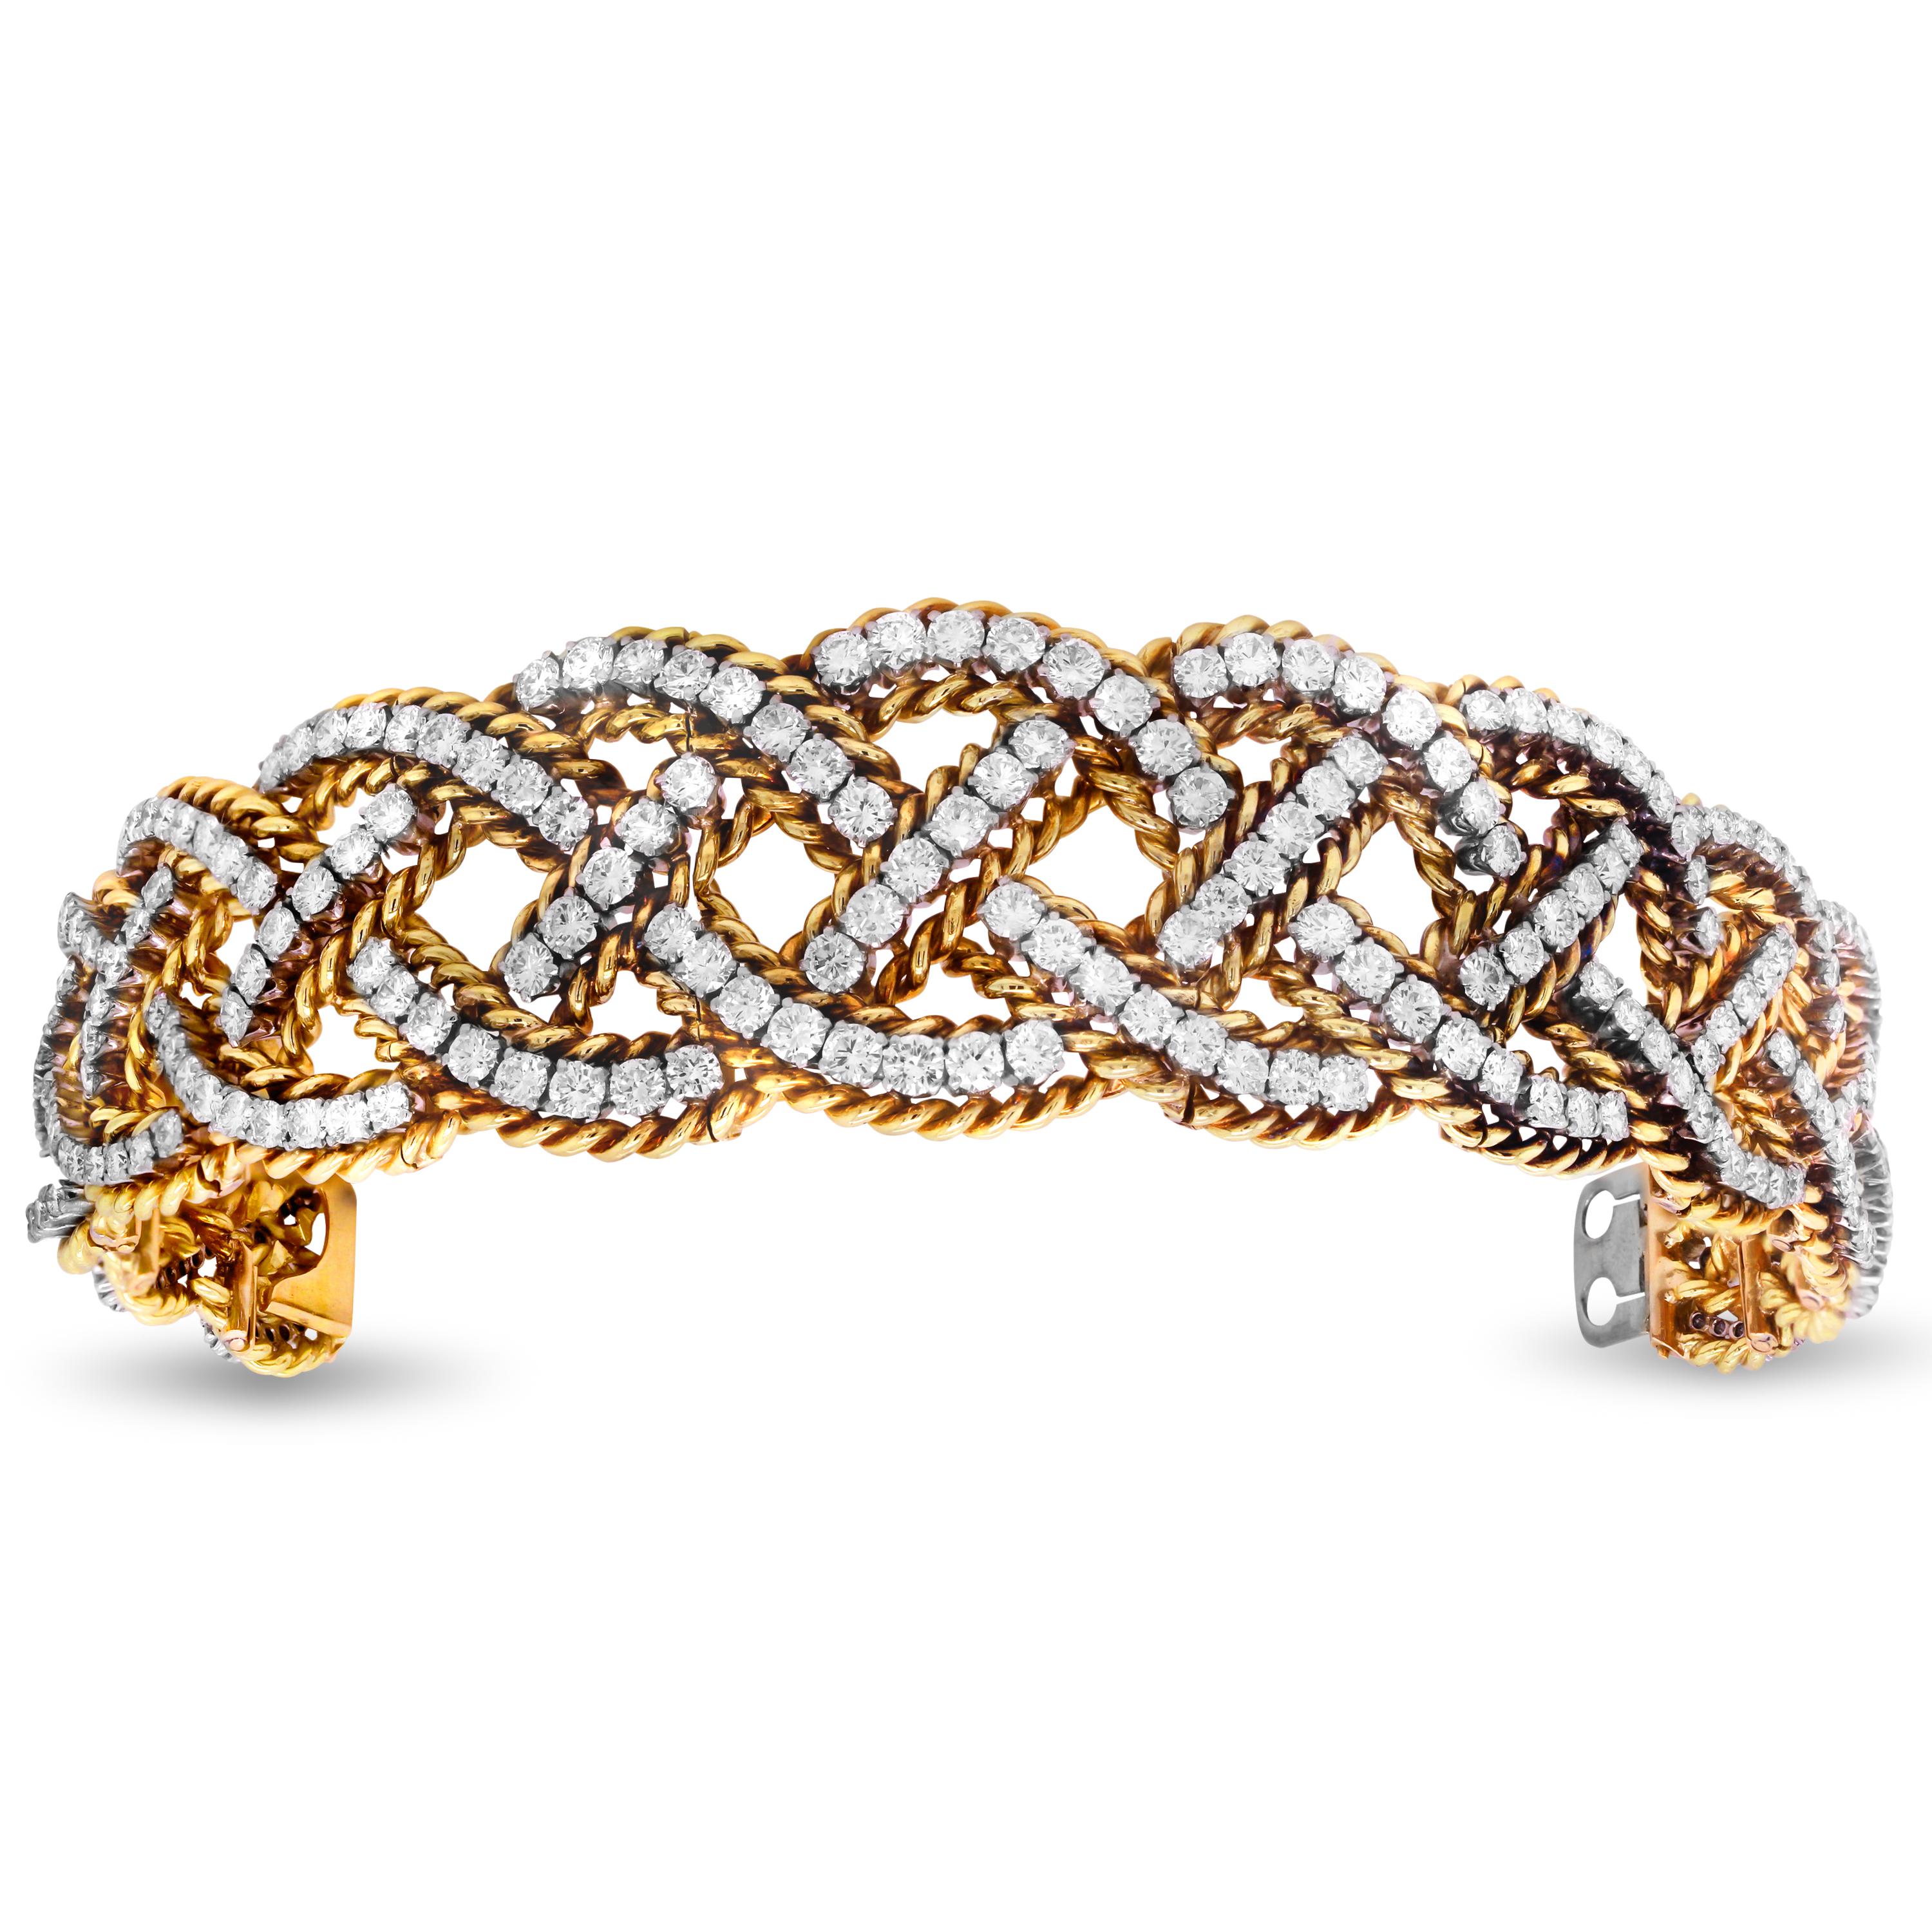 18K Yellow and White Two Tone Gold Diamond Graduated Links Twist Style Retro Bracelet

This unique and elegant bracelet features a twisted, intertwined design with diamonds all around. A state of the art piece that does not open straight out.